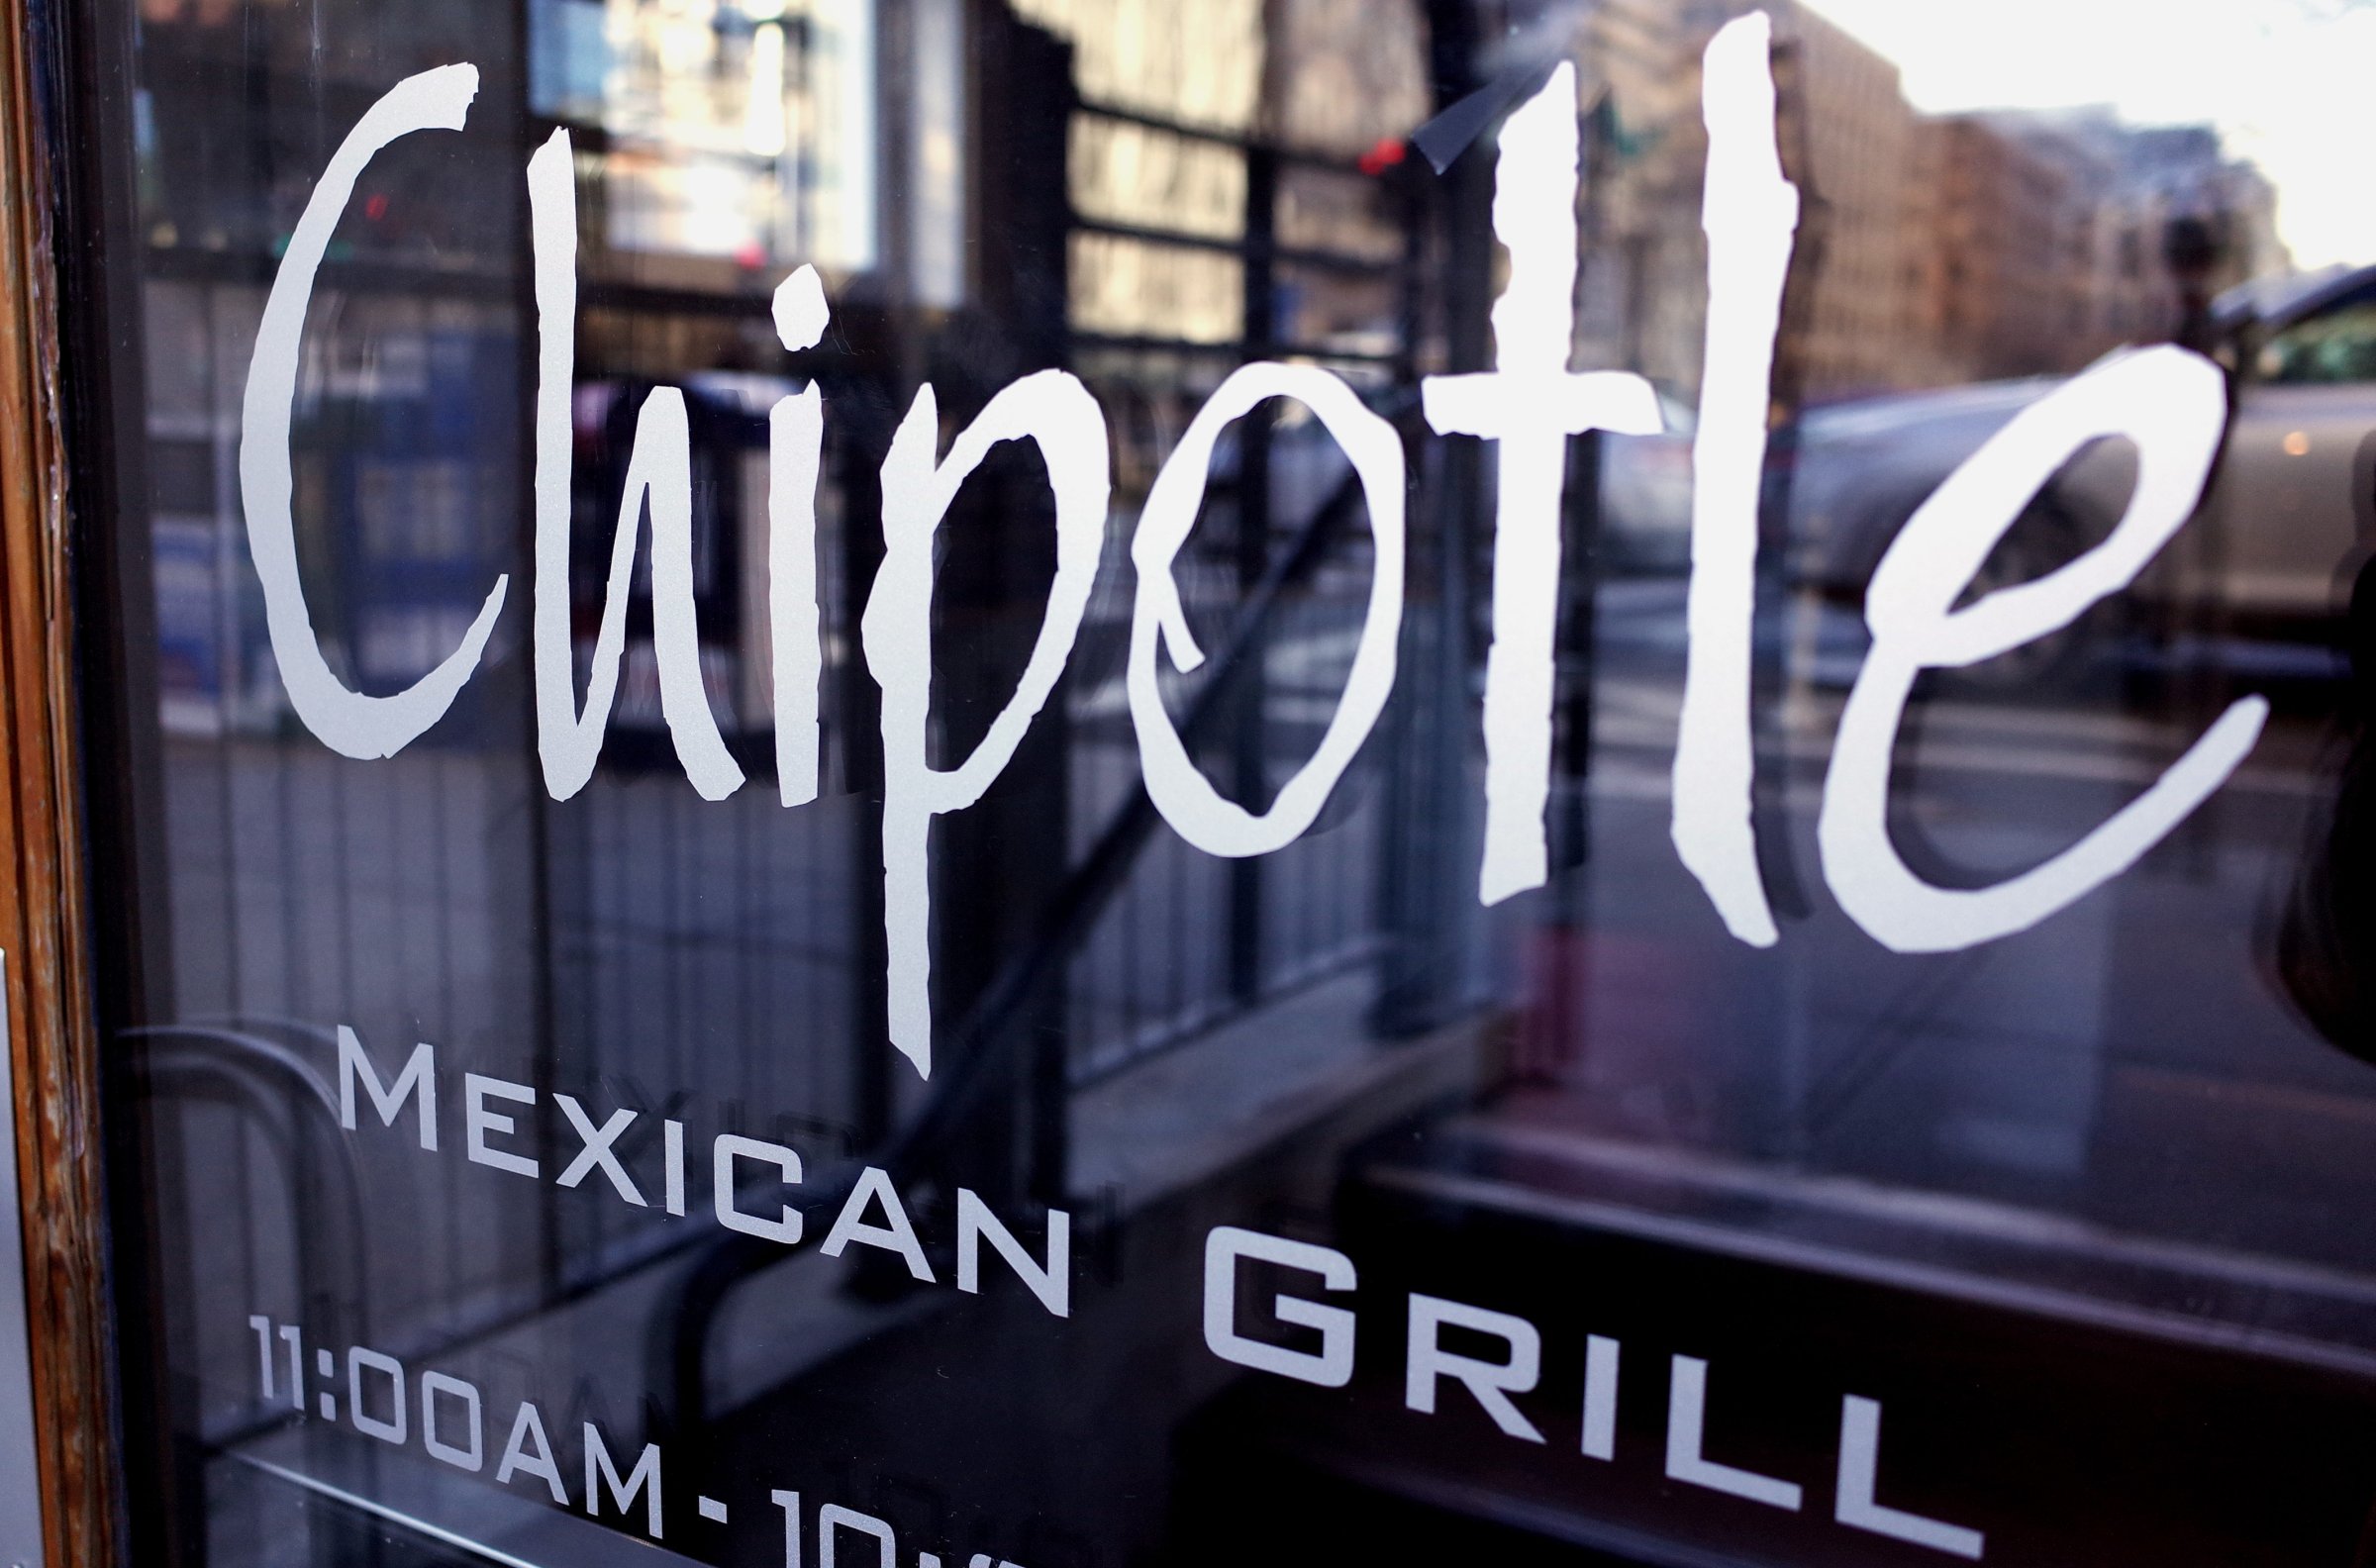 The Chipotle logo is seen on the door of one of its restaurants on January 11, 2015 in Washington, DC.